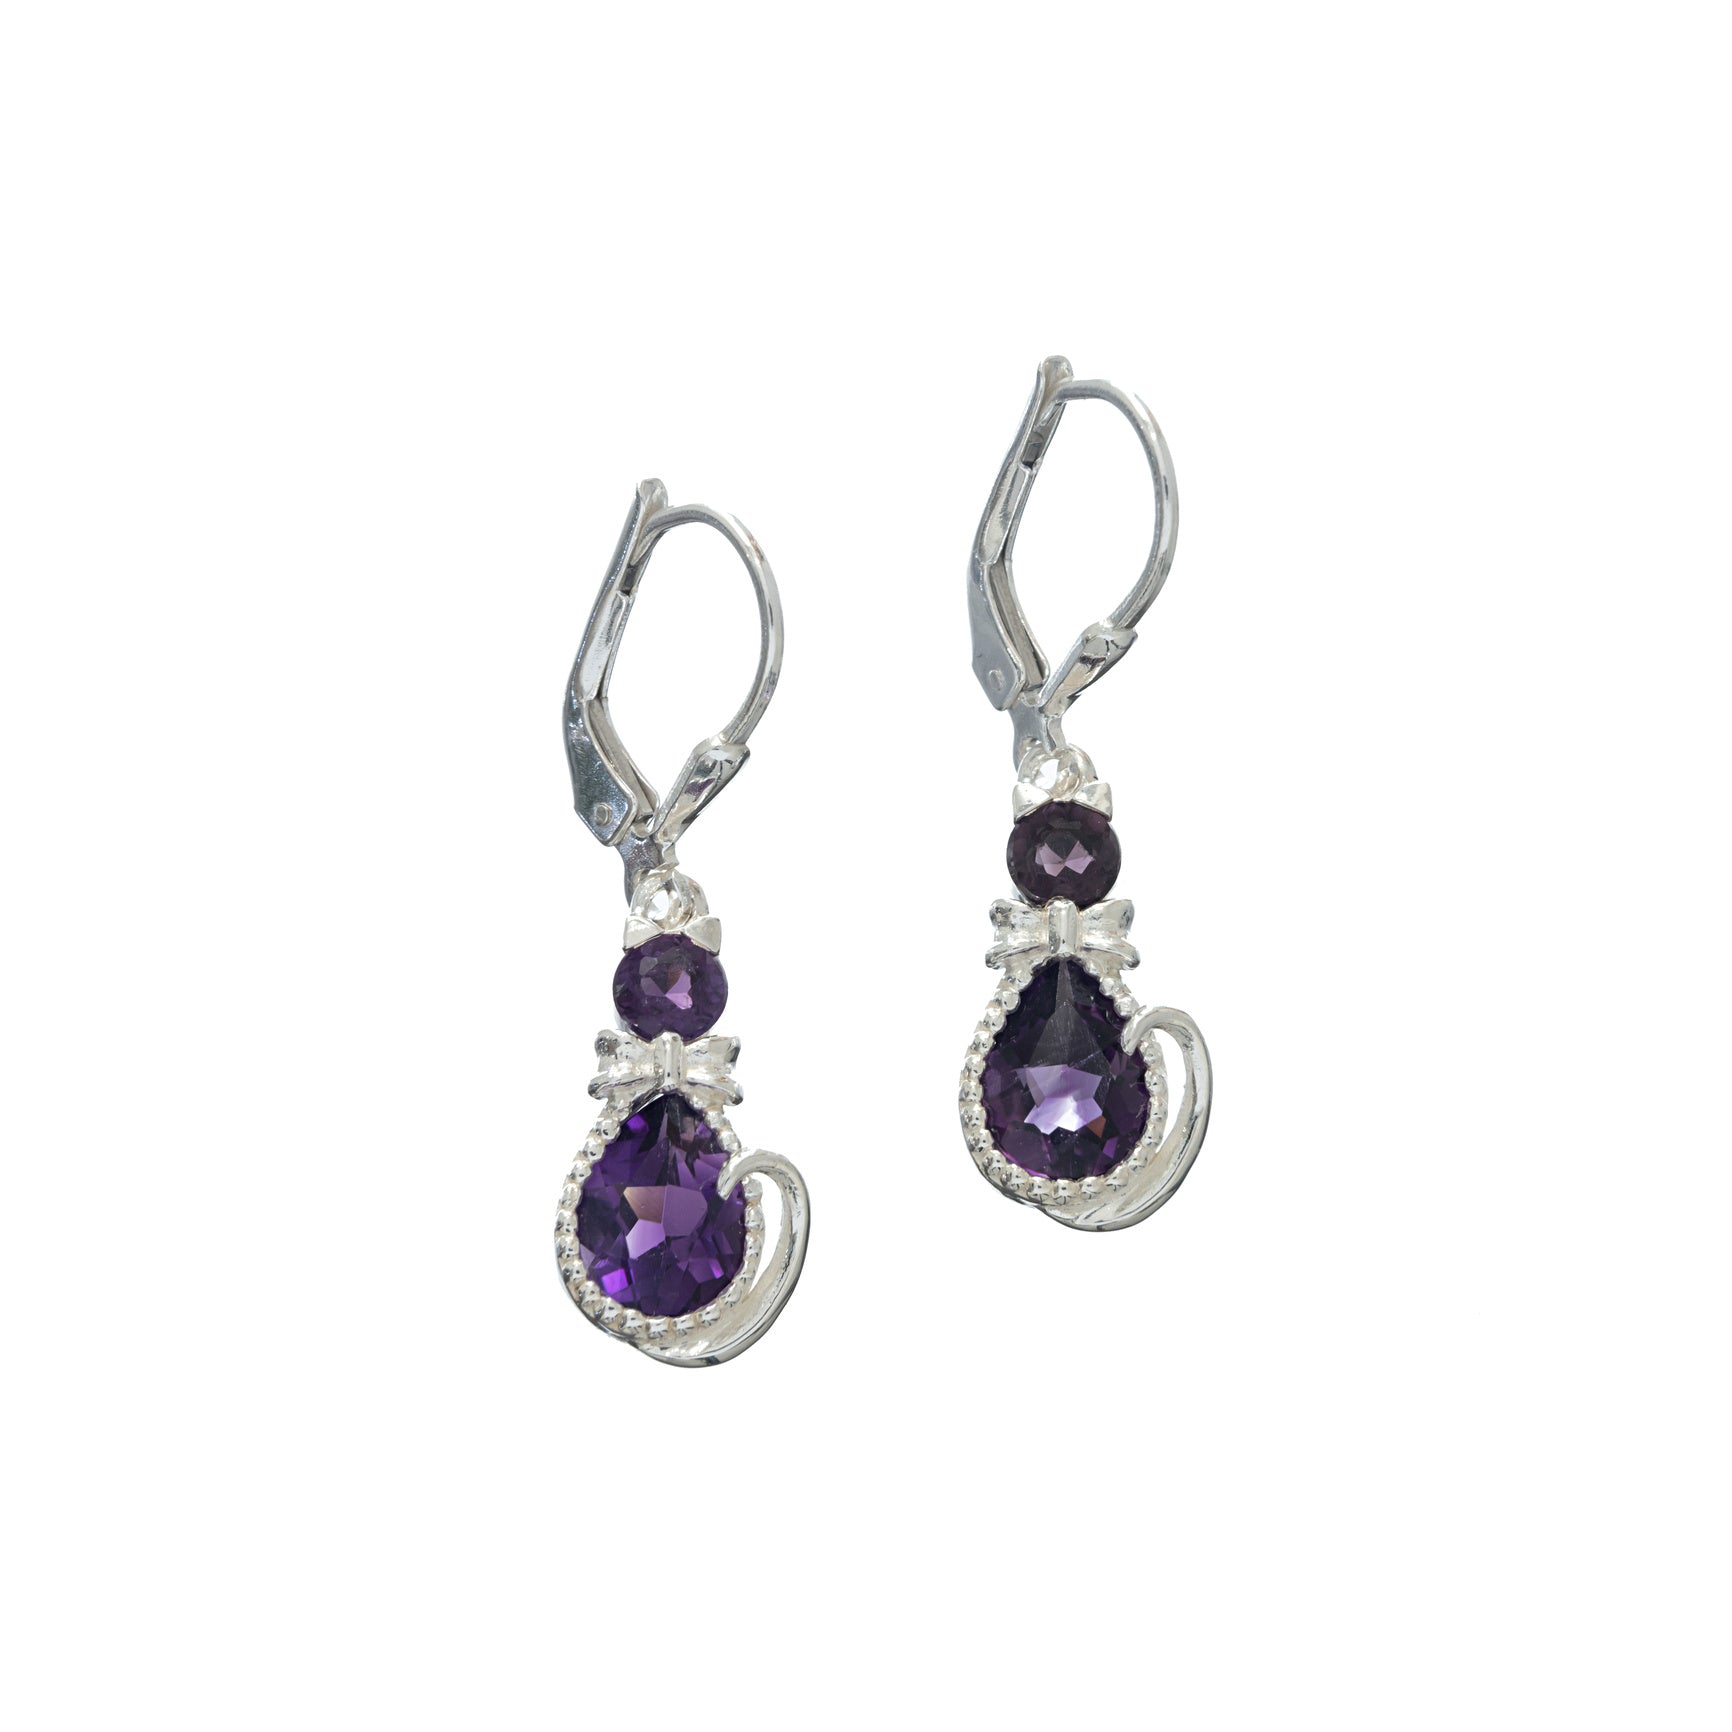 Kitty Cat Amethyst and Sterling Earrings